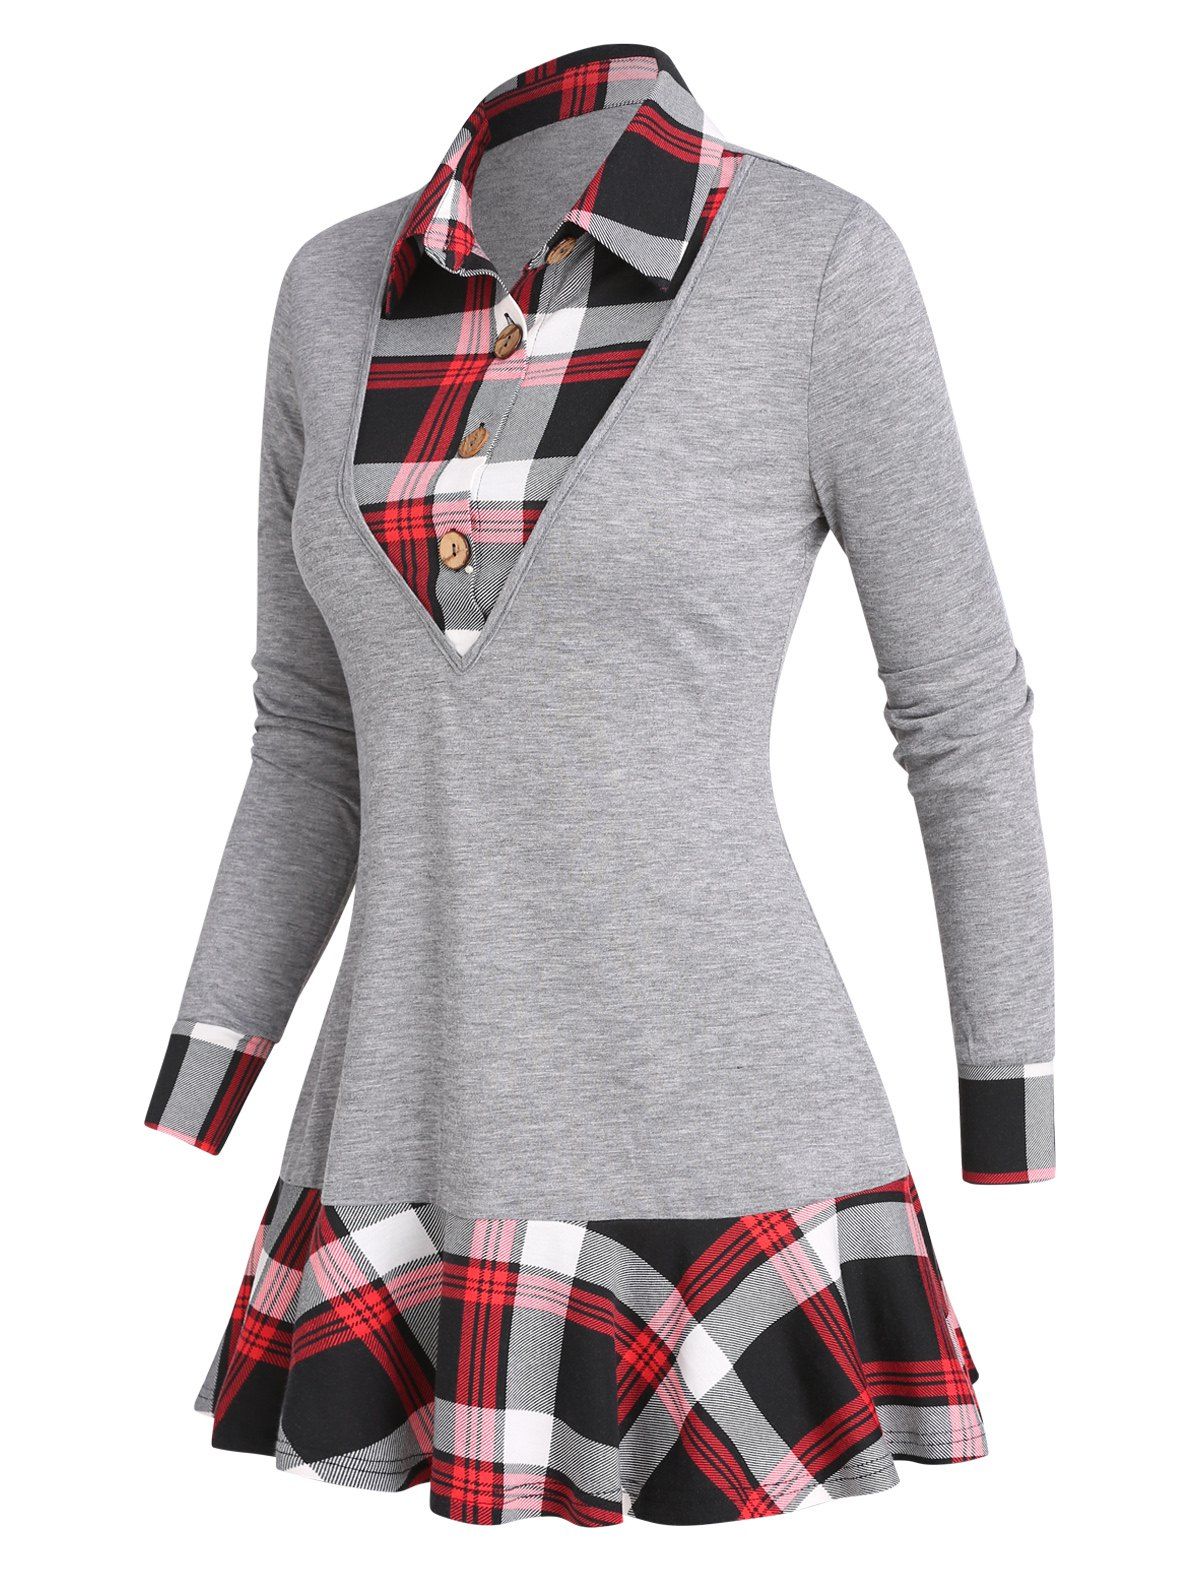 Casual Faux Twinset T Shirt Plaid Print Button Skirted Turn Down Collar Long Sleeve Tee - GRAY L